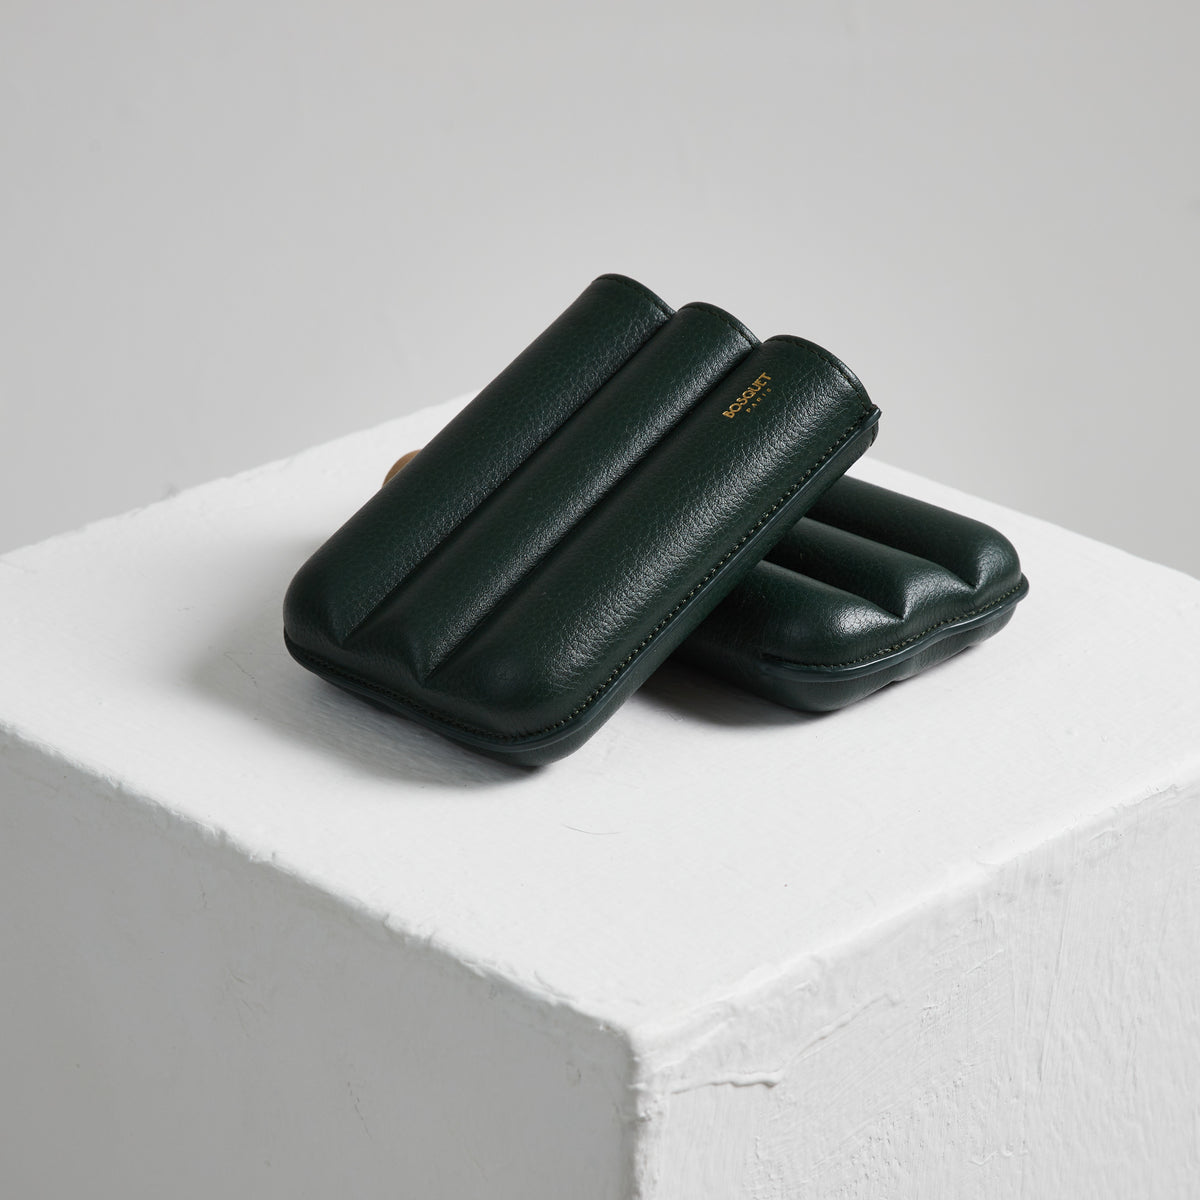 Two green Bosque cigar cases made with French leathers sitting on top of a white cube.